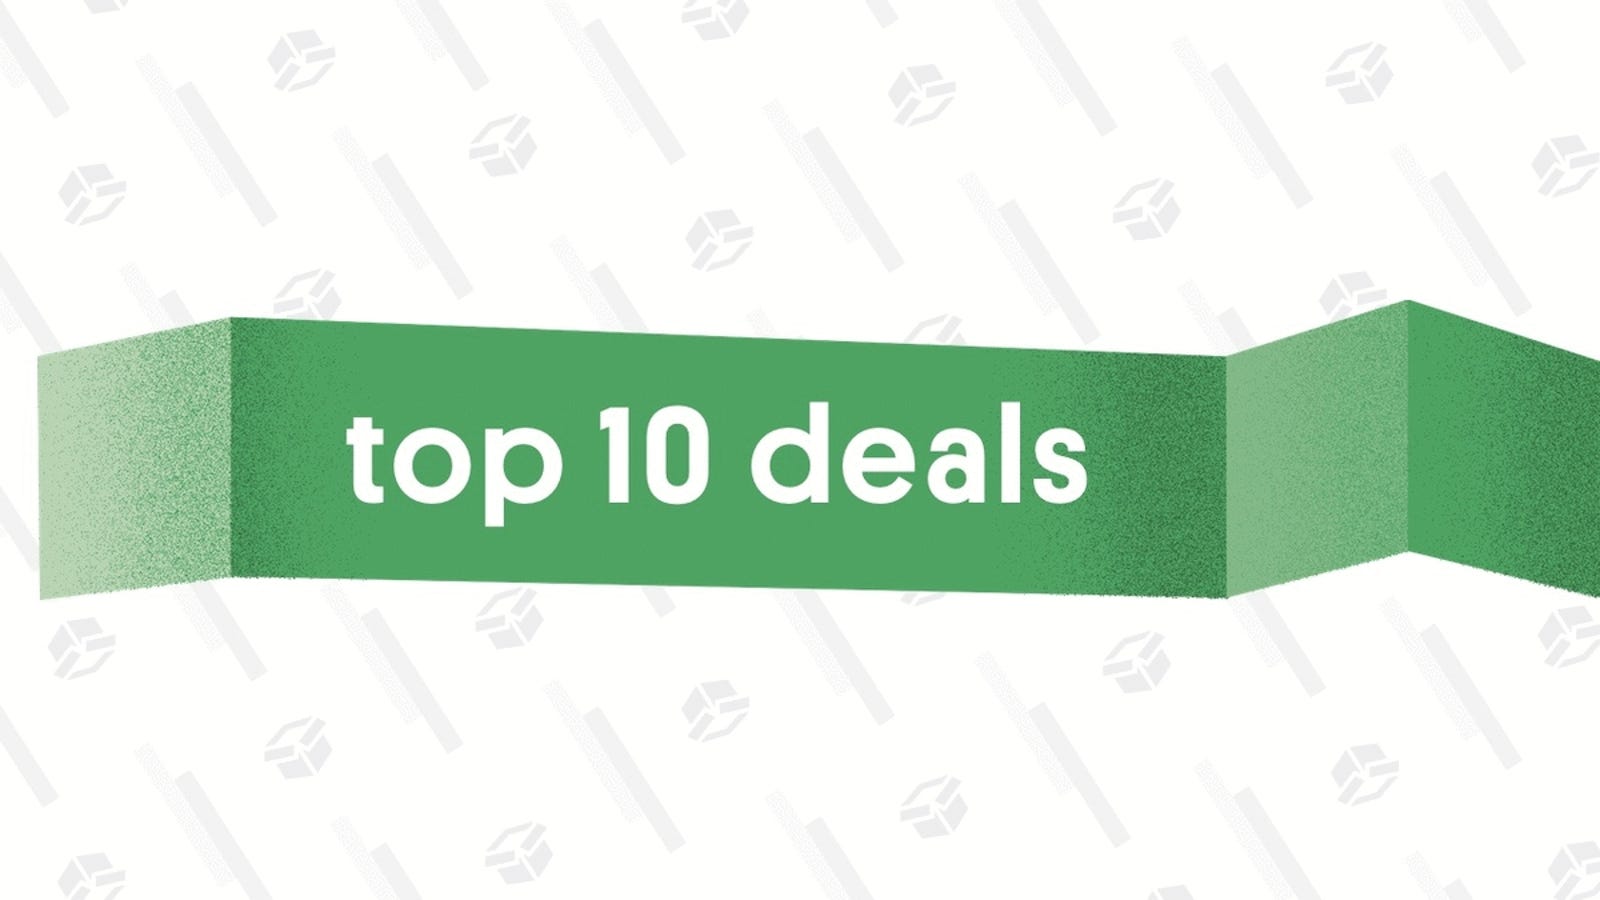 photo of The 10 Best Deals of September 25, 2018 image